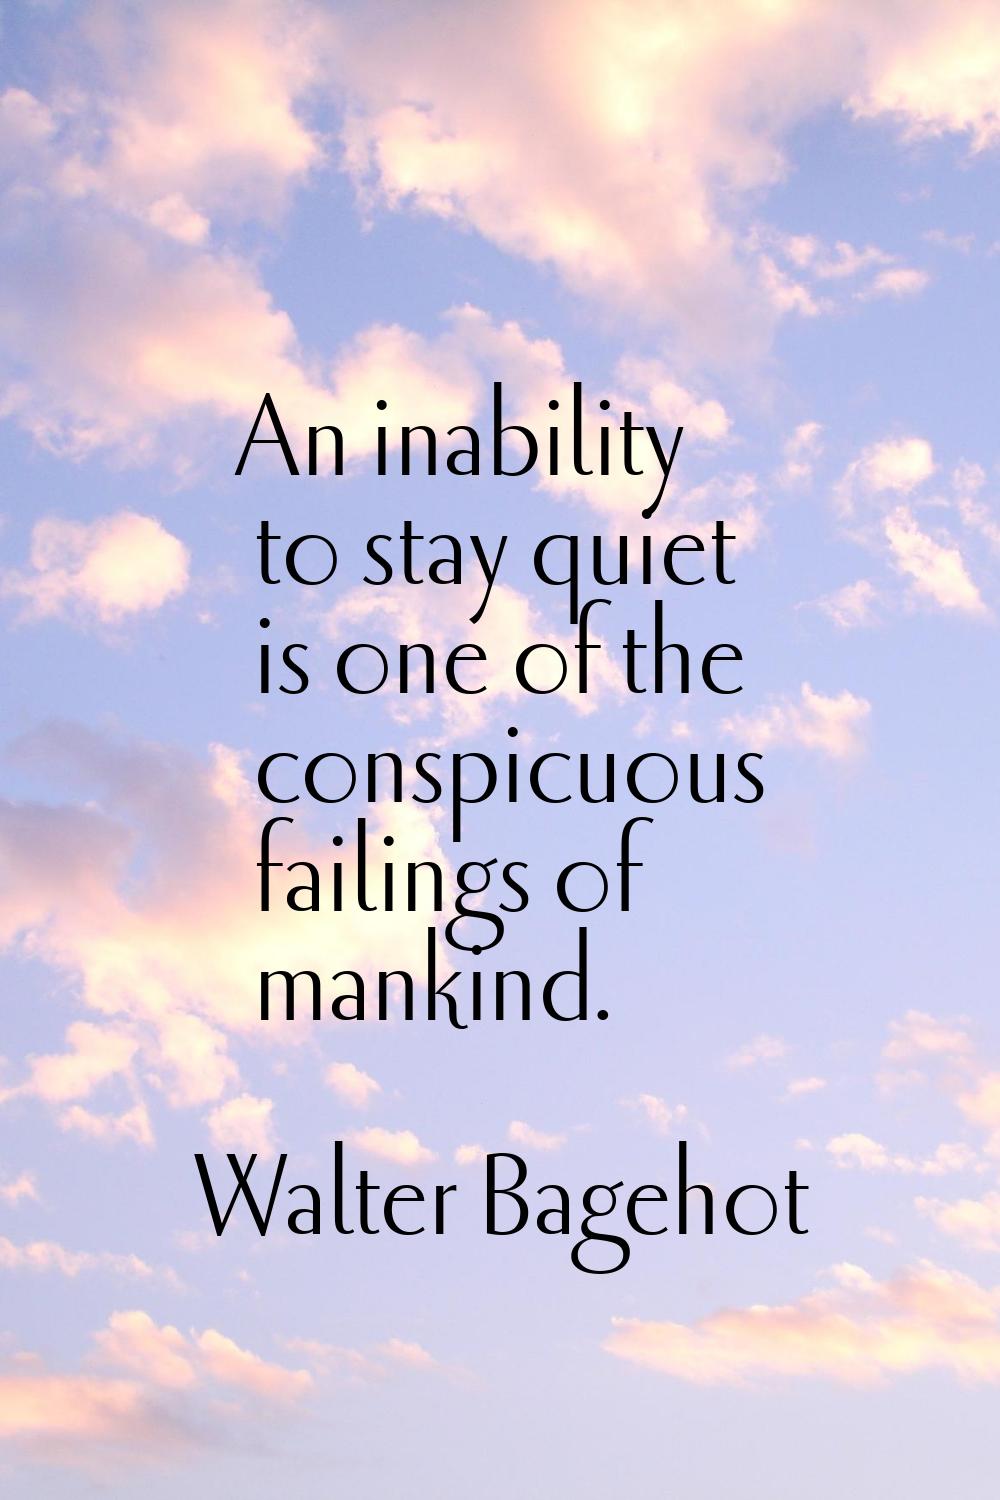 An inability to stay quiet is one of the conspicuous failings of mankind.